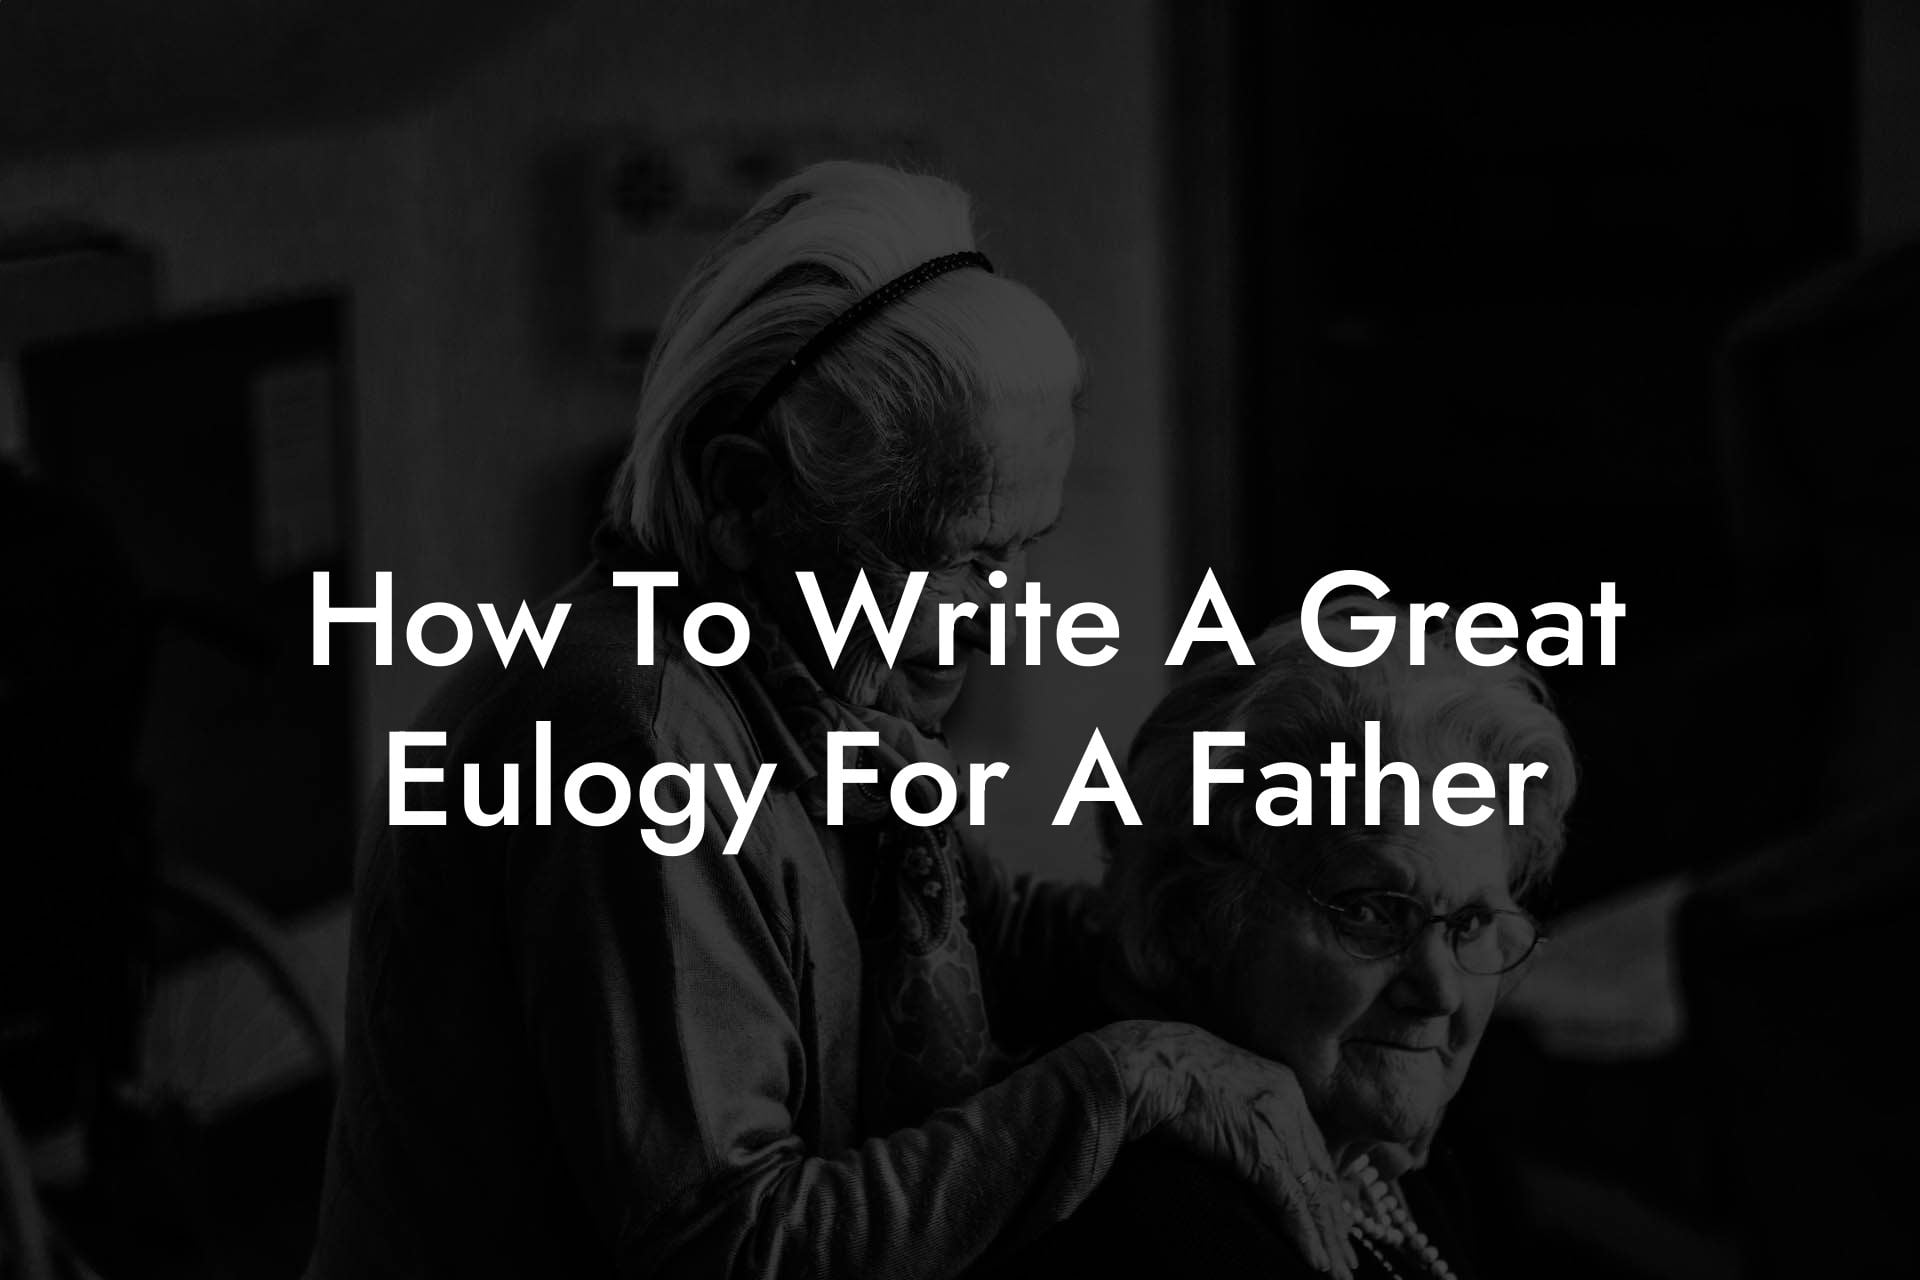 How To Write A Great Eulogy For A Father